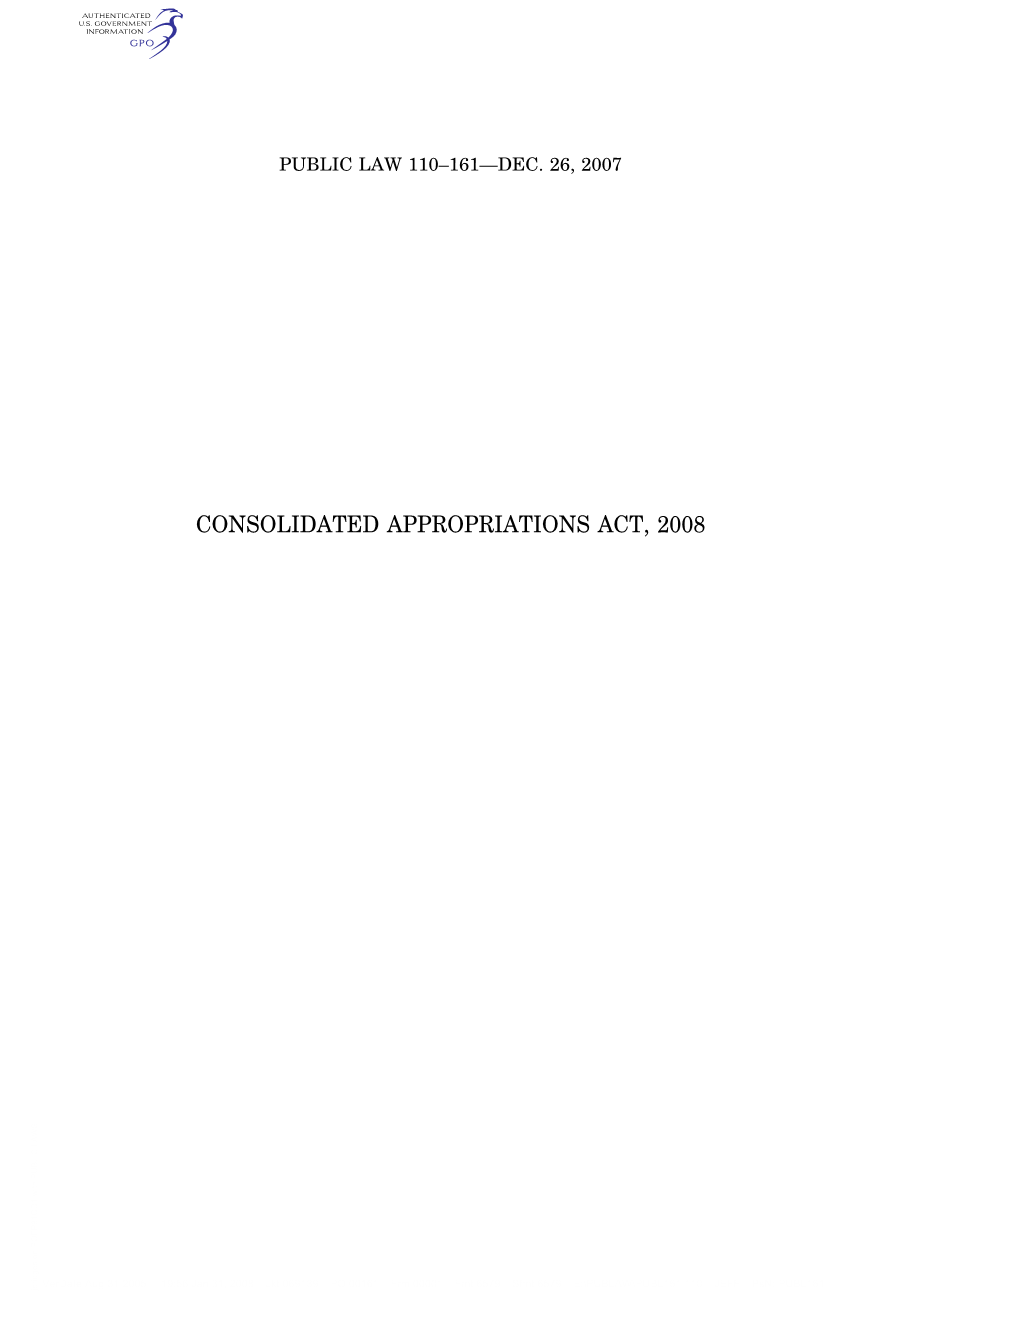 Consolidated Appropriations Act, 2008